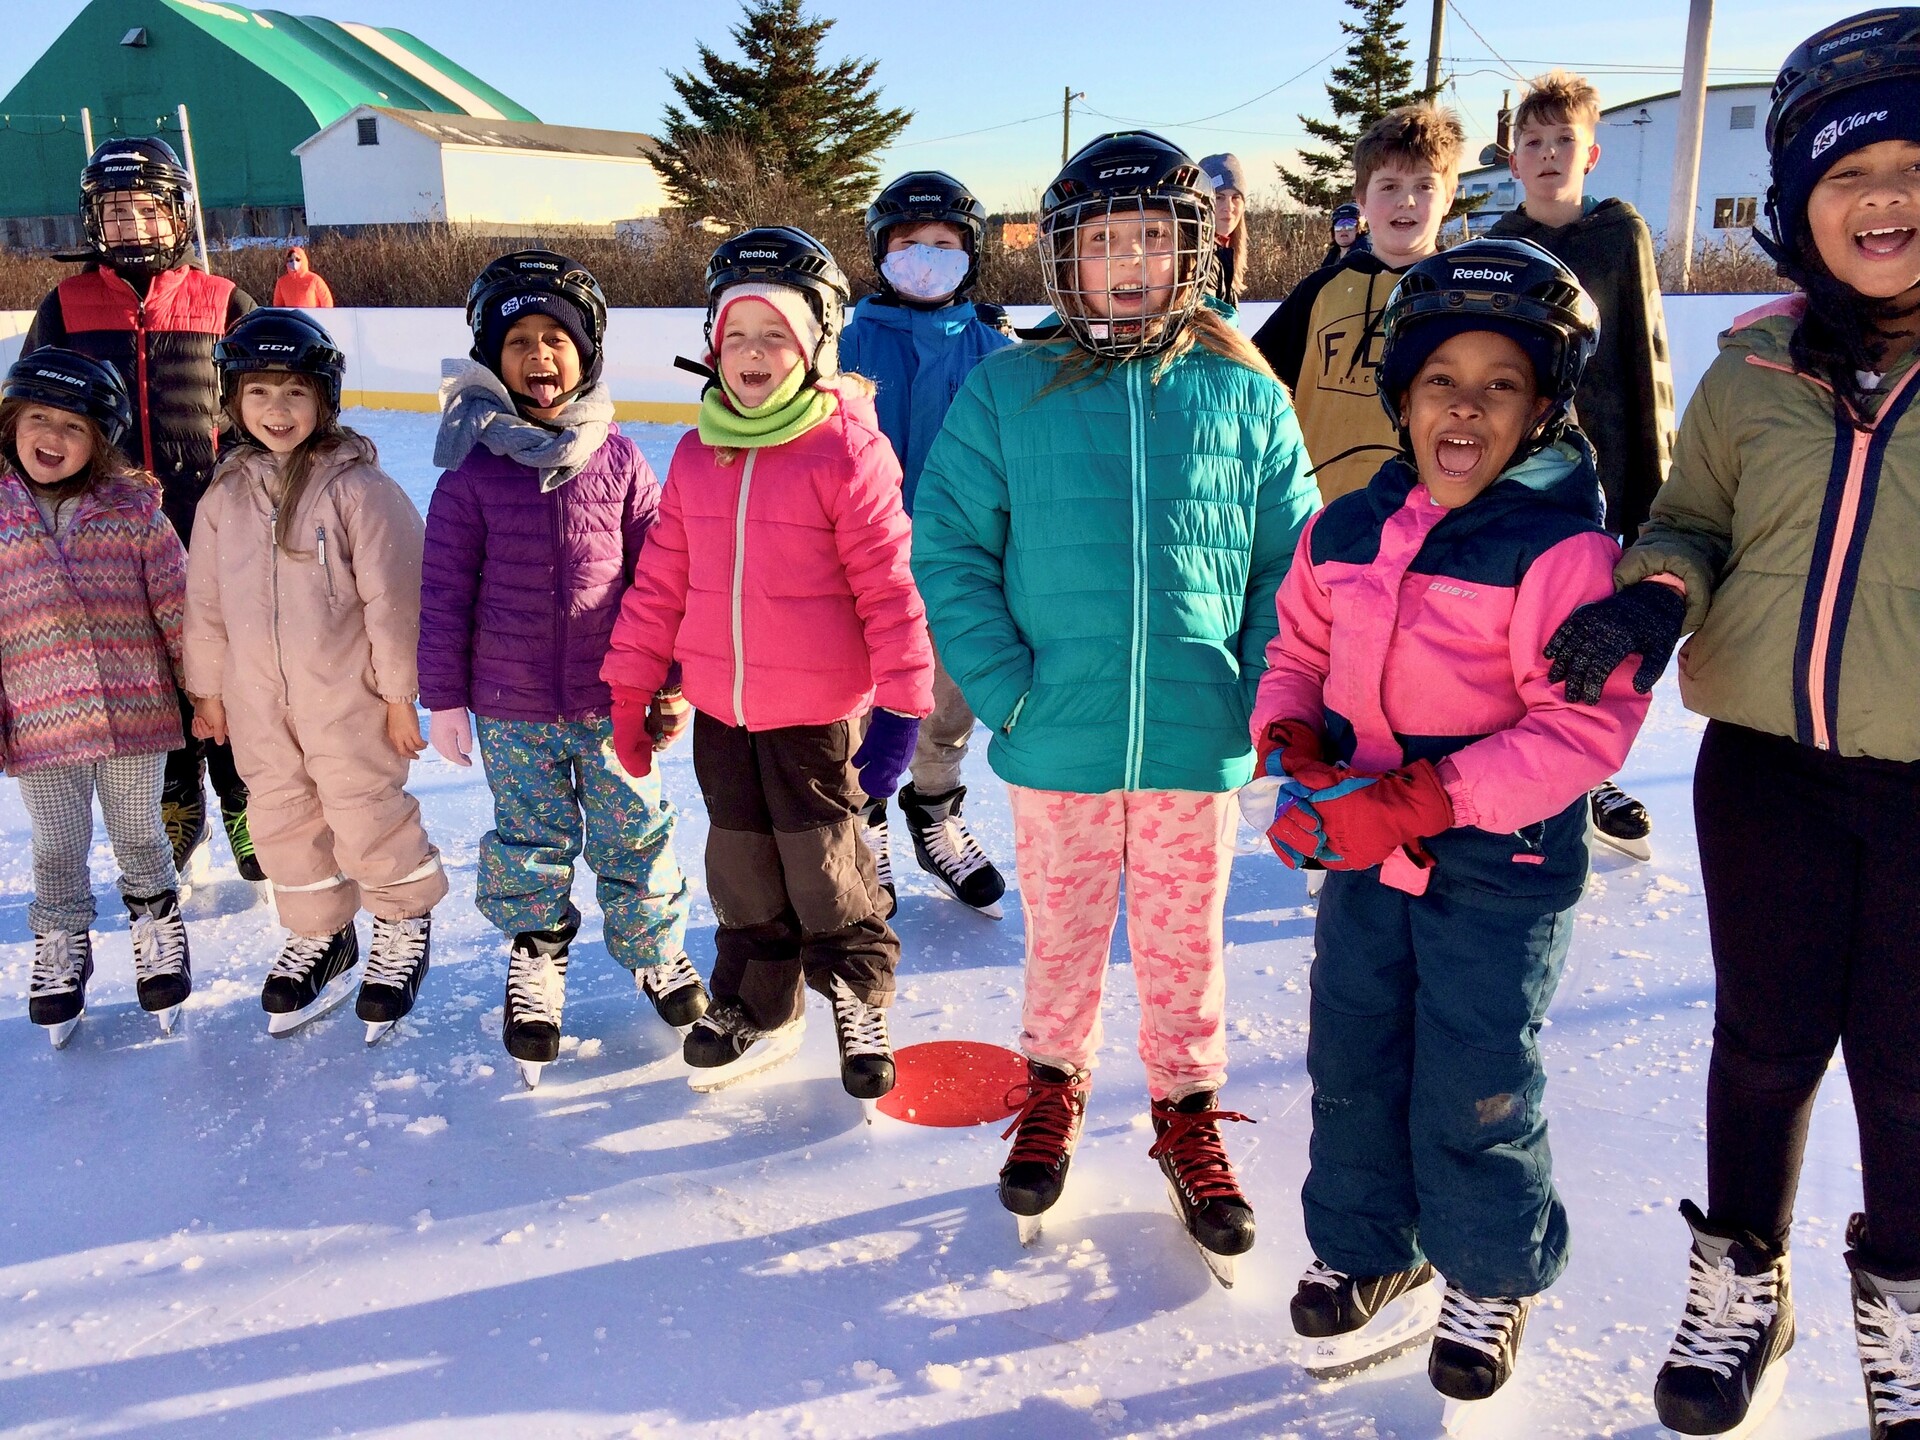 Children on the outdoor skating rink